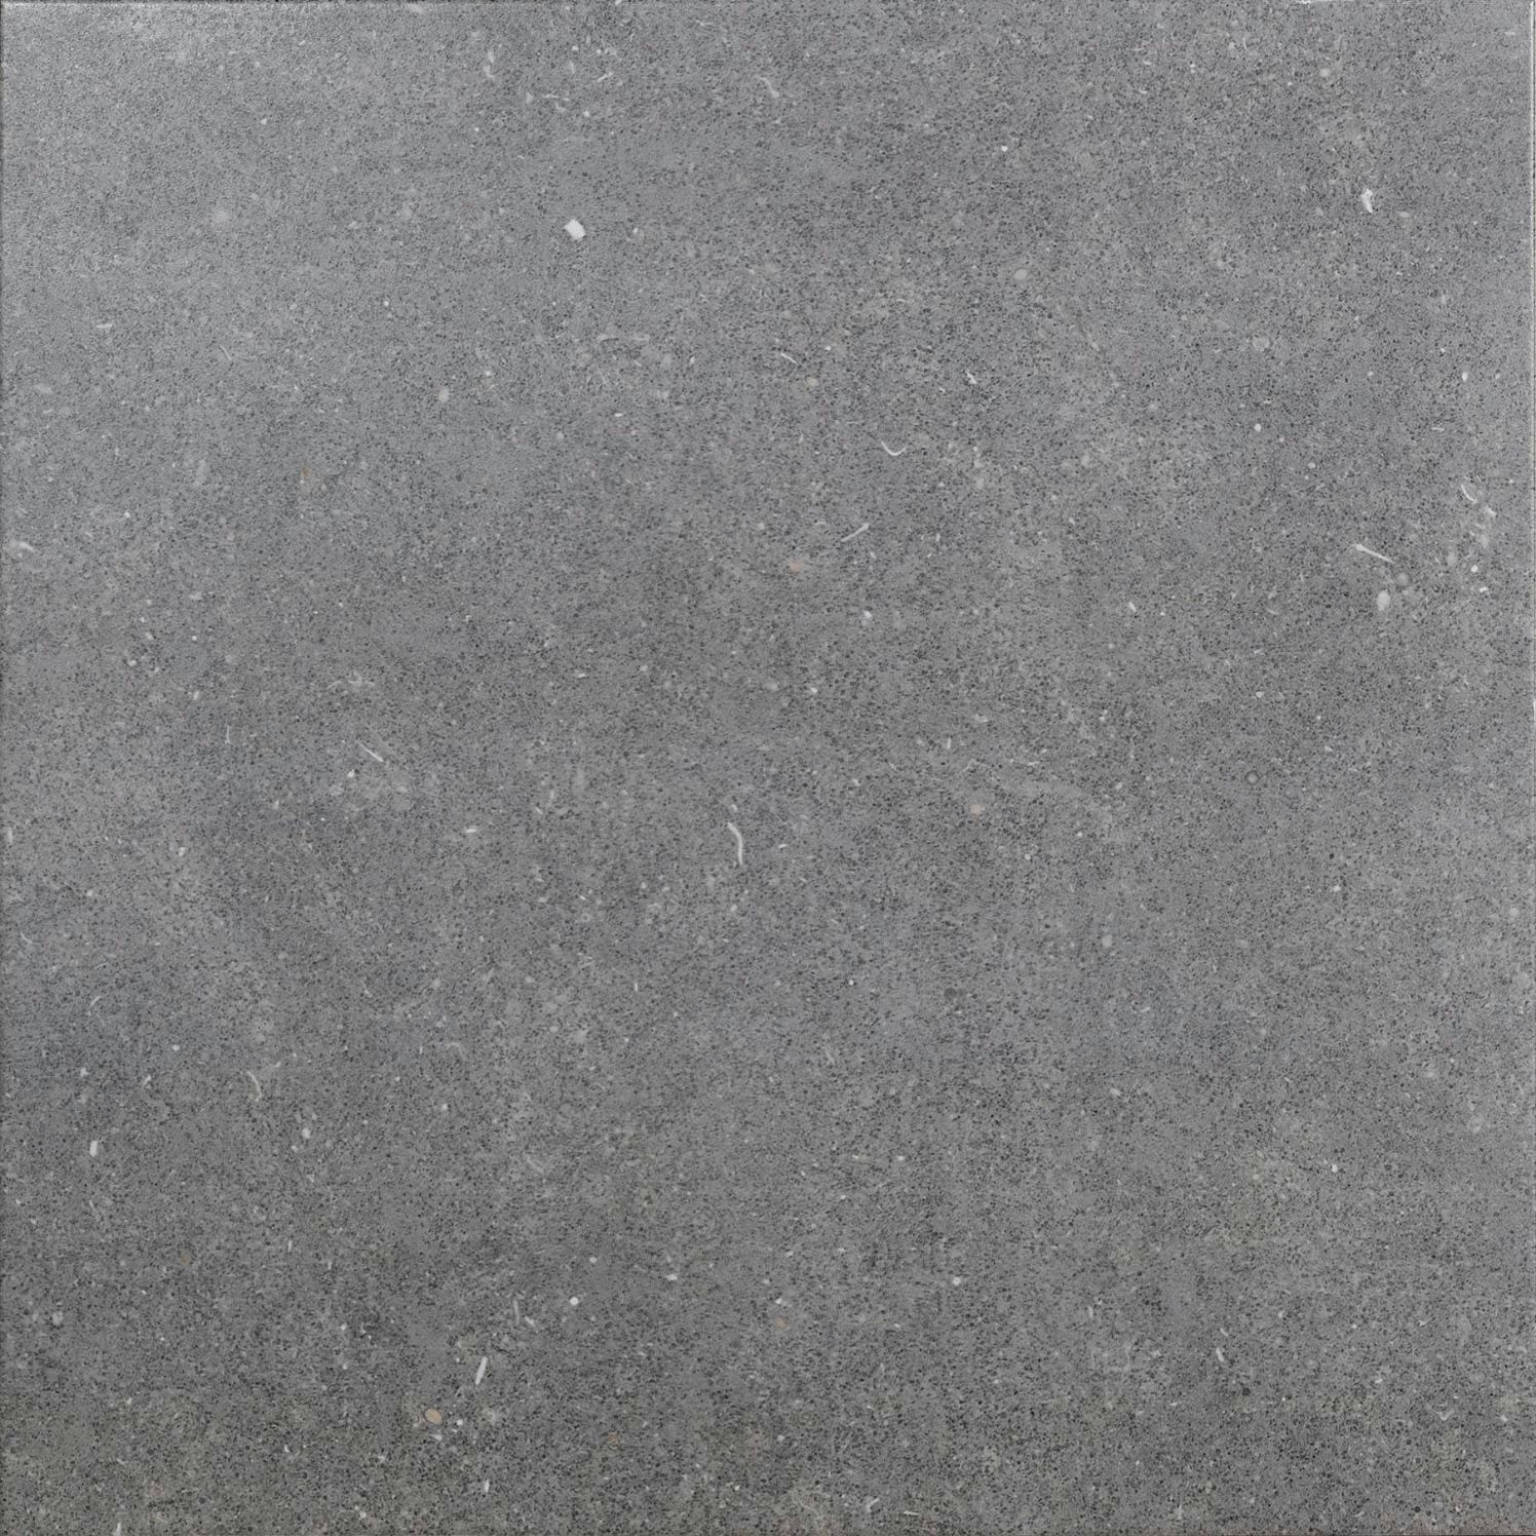 Bruselas Gris | Stones & More | Finest selection of Mosaics, Glass, Tile and Stone